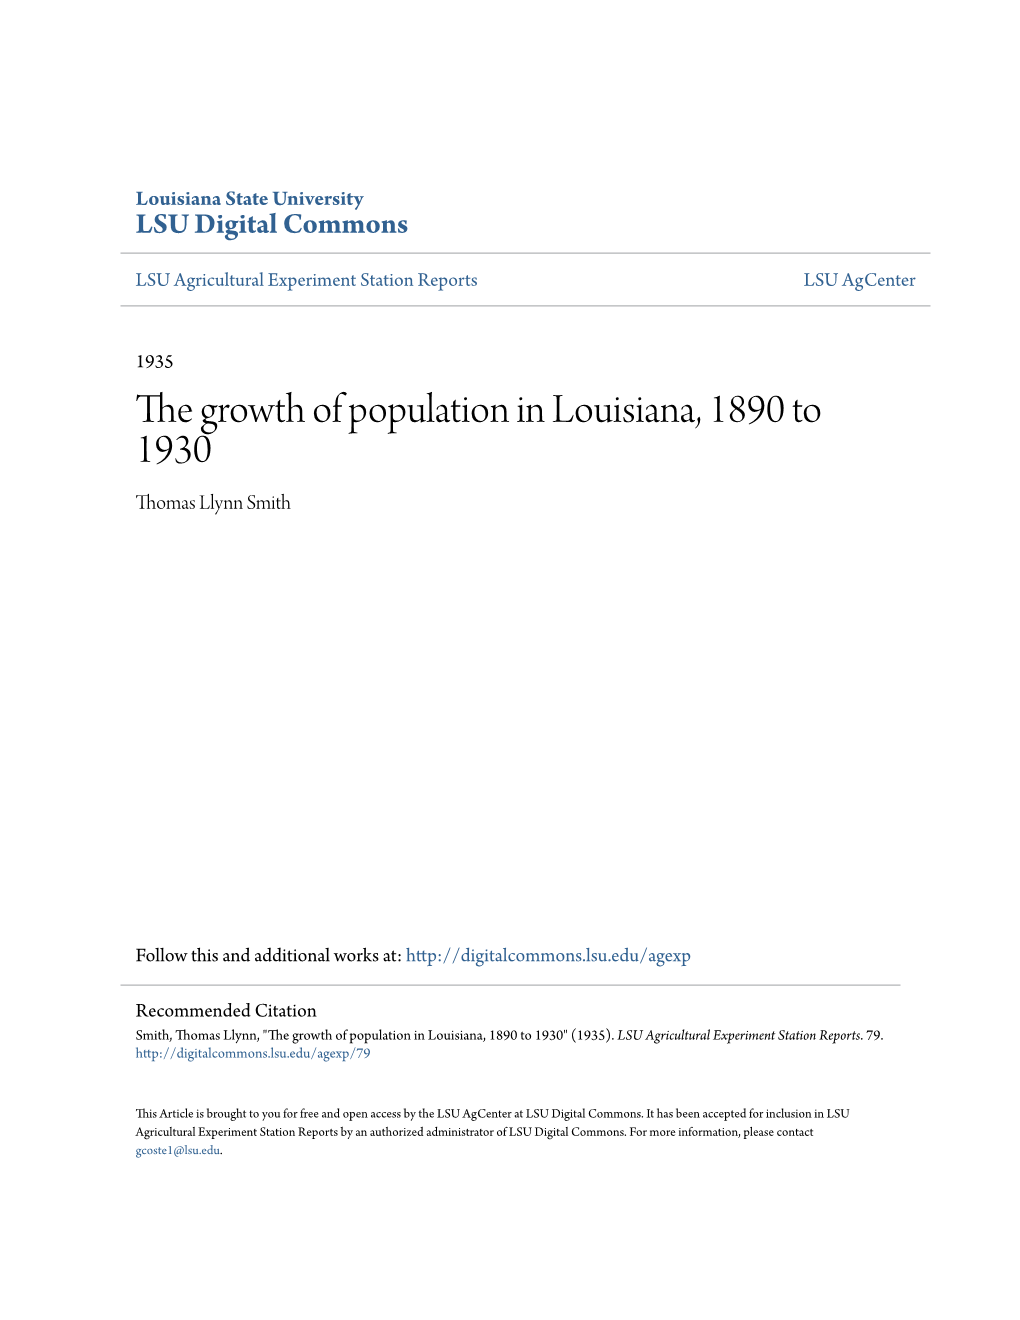 The Growth of Population in Louisiana, 1890 to 1930 Thomas Llynn Smith